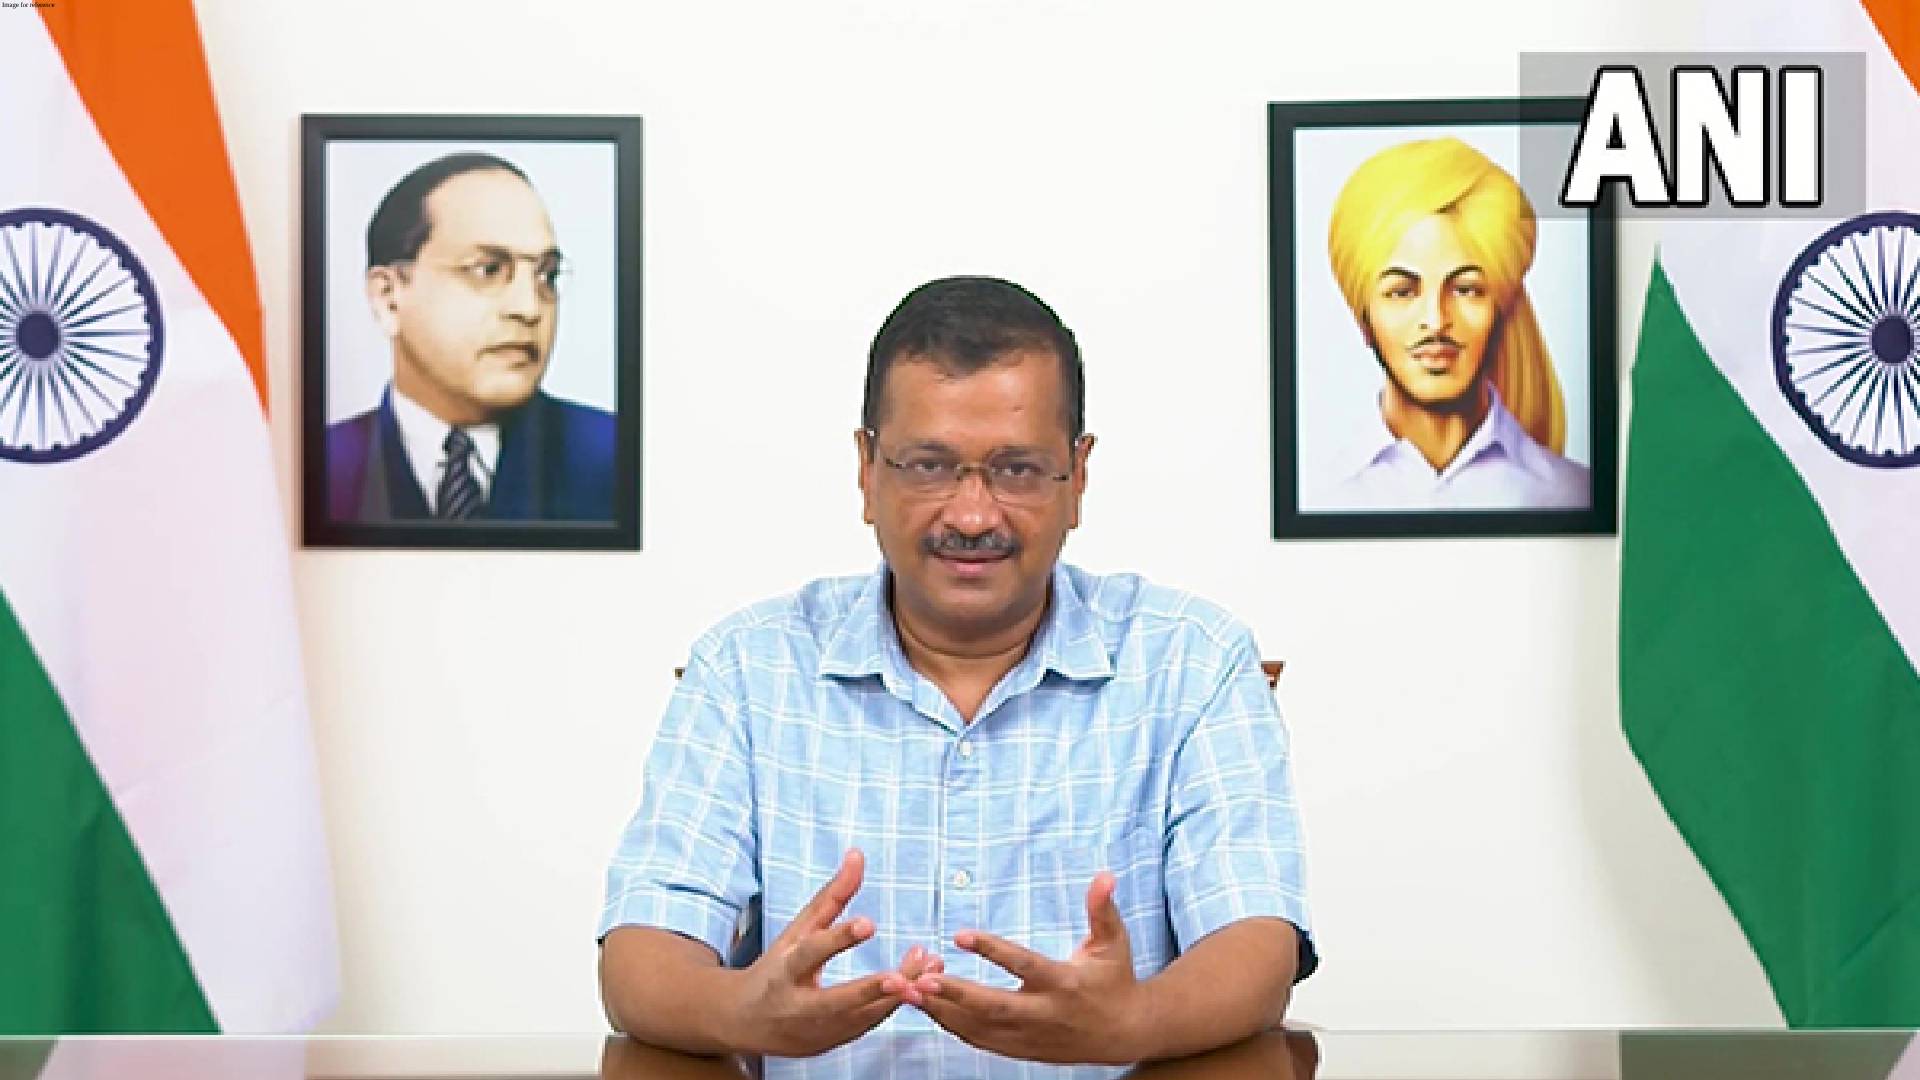 ED issues seventh summon to CM Kejriwal to appear on Feb 26: Sources